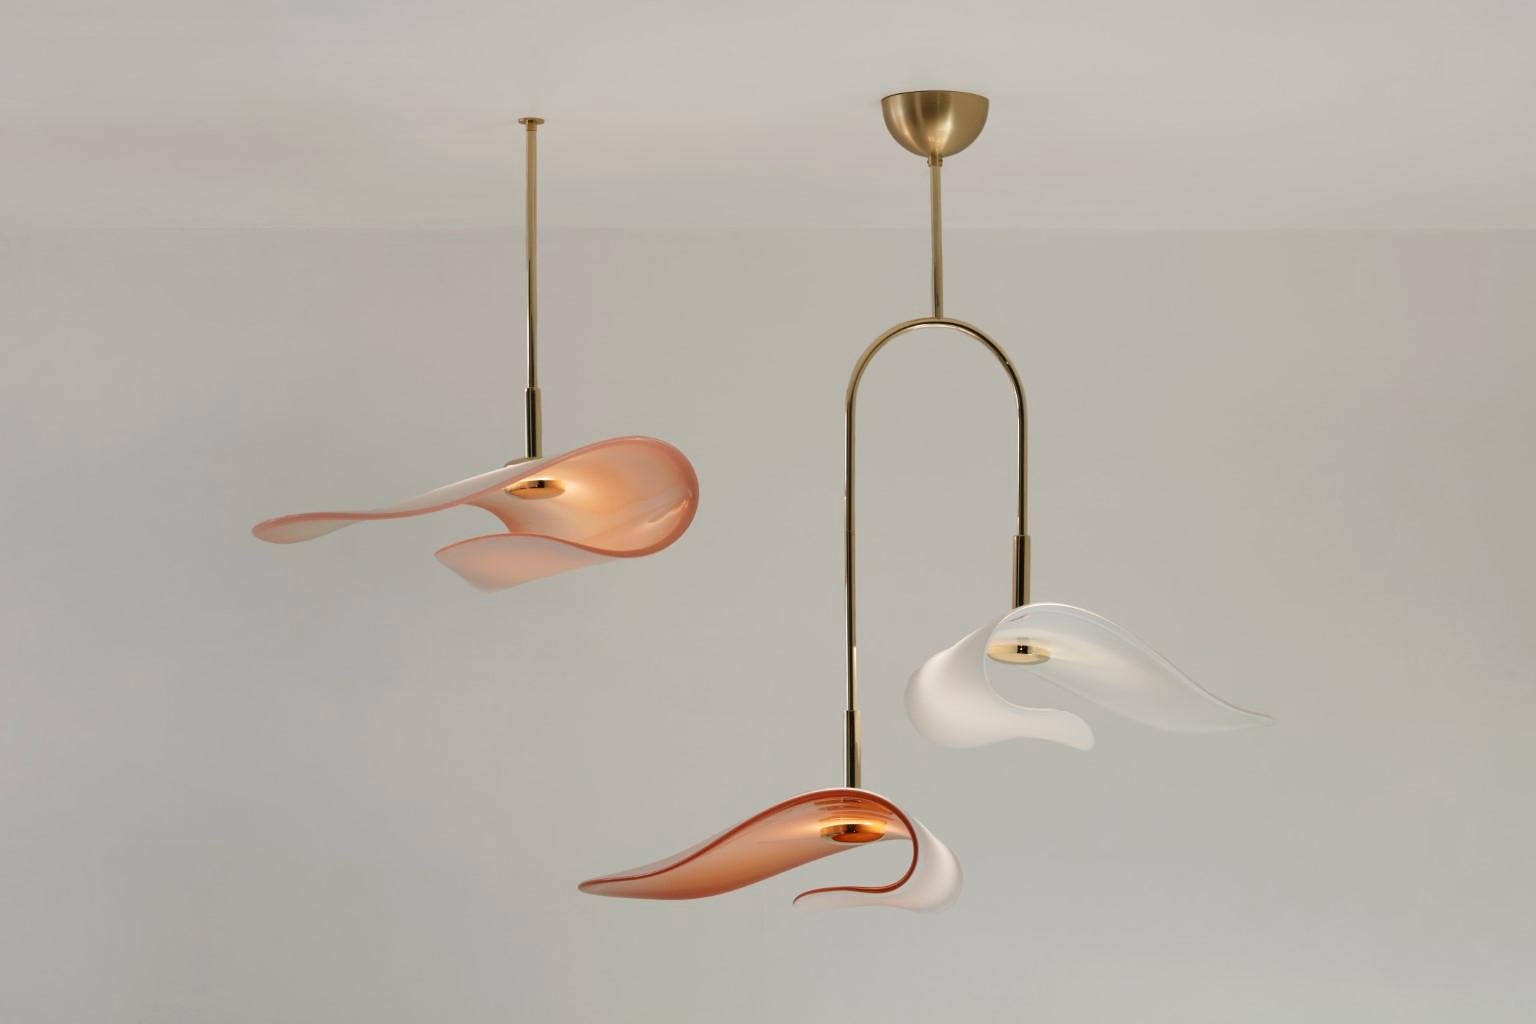 Brume pendant light by Mydriaz
Dimensions: D48 x W43 x H20 cm
Materials: Polished brass, pale gold finish, and colored glass.

All our lamps can be wired according to each country. If sold to the USA it will be wired for the USA for